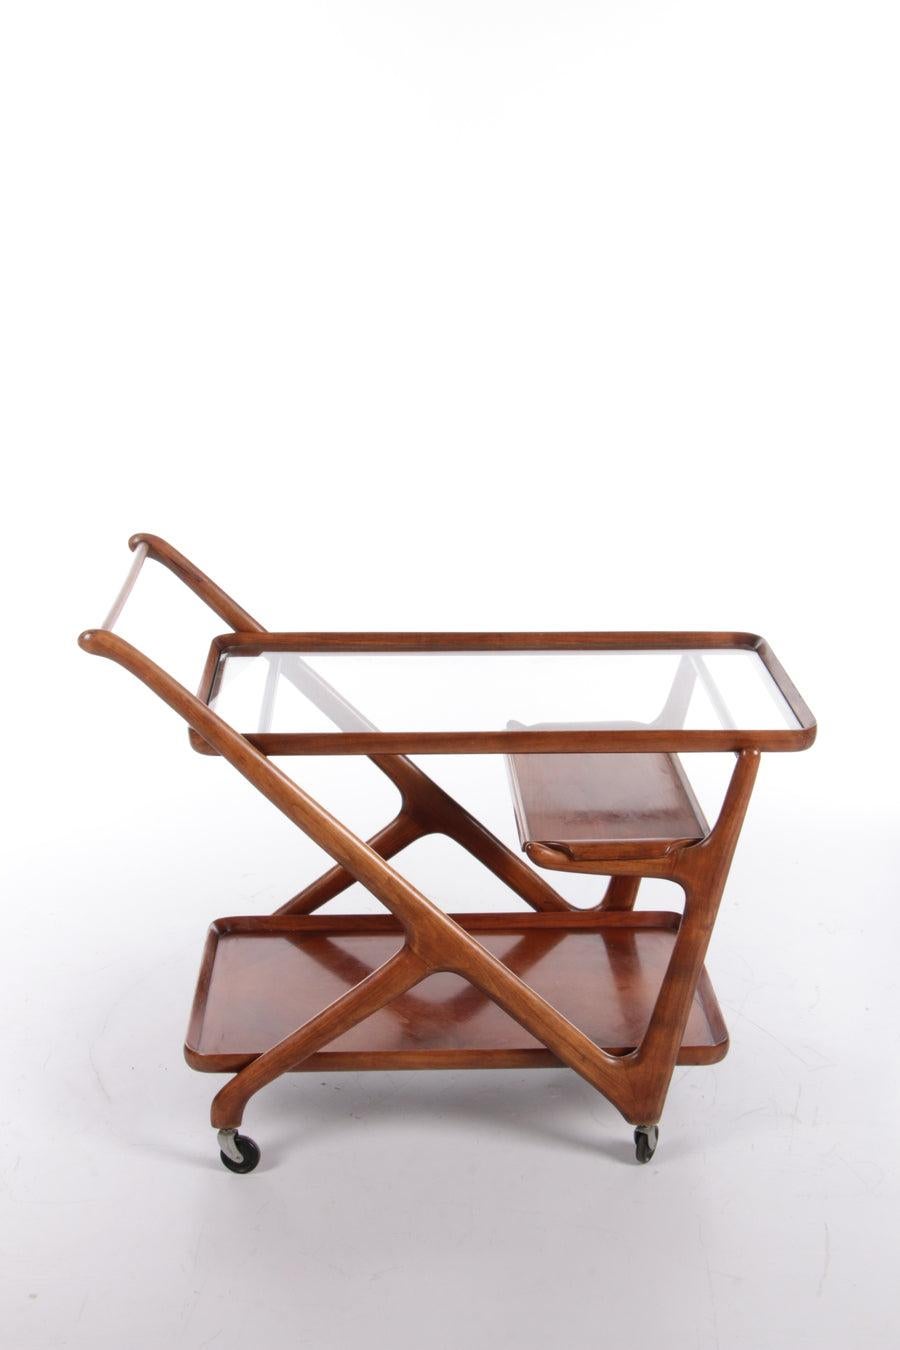 Design Trolley by Cesare Lacca made by Cassina, 1950s

This beautiful serving trolley from the 1950s/60s.

Is a design by Cesare Lacca and is made at Cassina.

Country of origin: Italy.

Very special design due to the organic shapes.

Equipped with